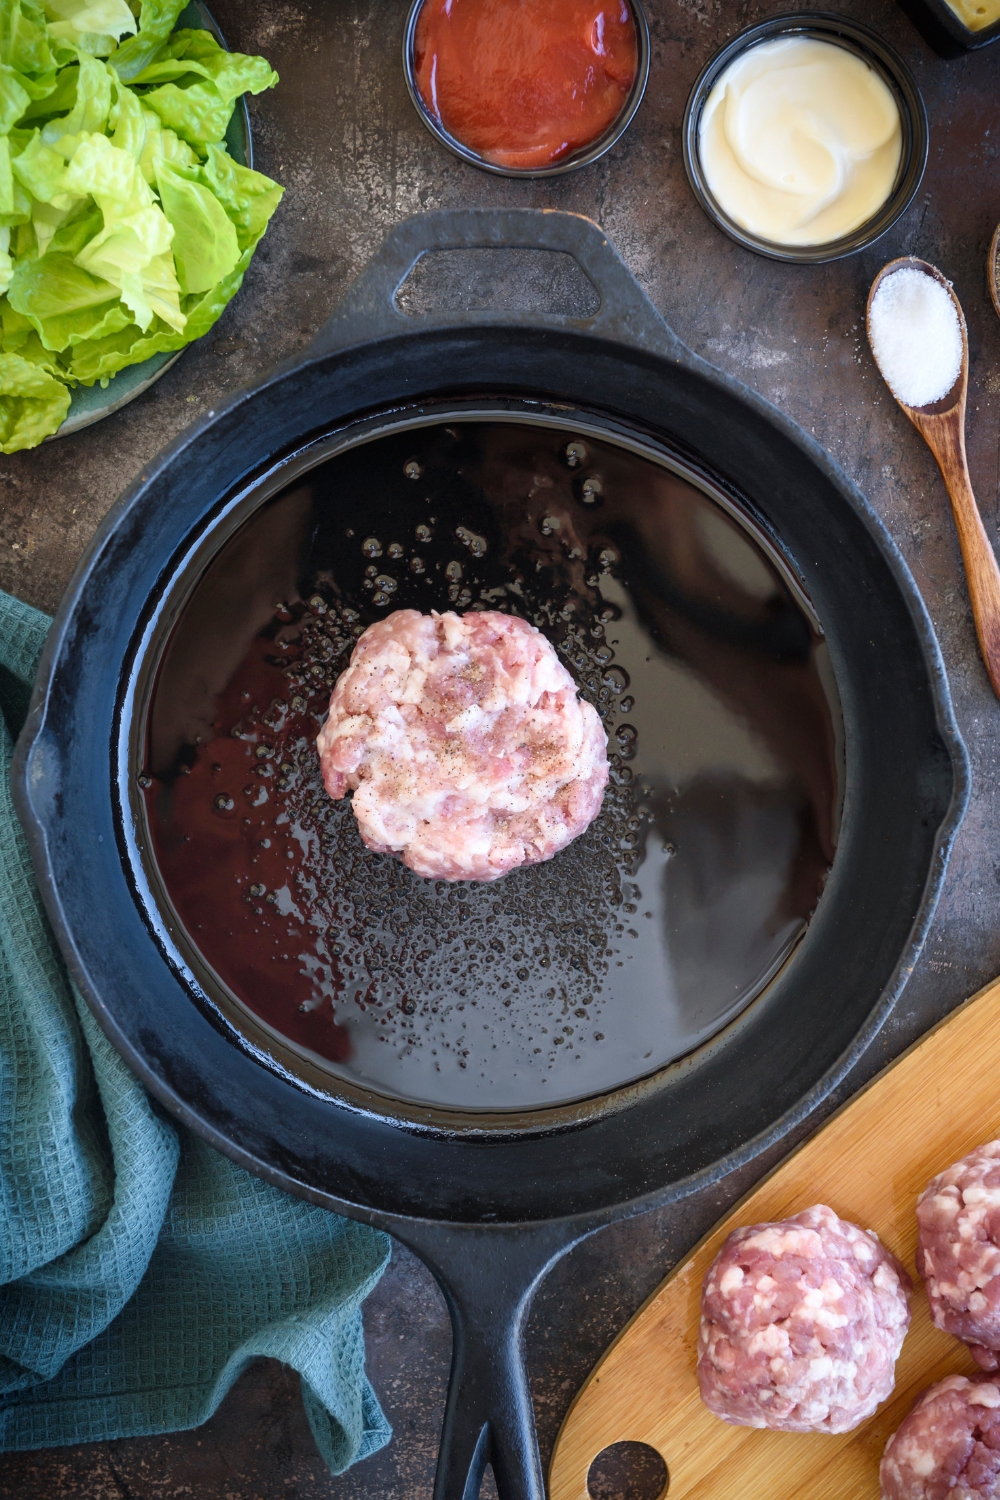 A ball of burger meat is in a cast iron pan with oil. Small bowls of ingredients surround the pan.